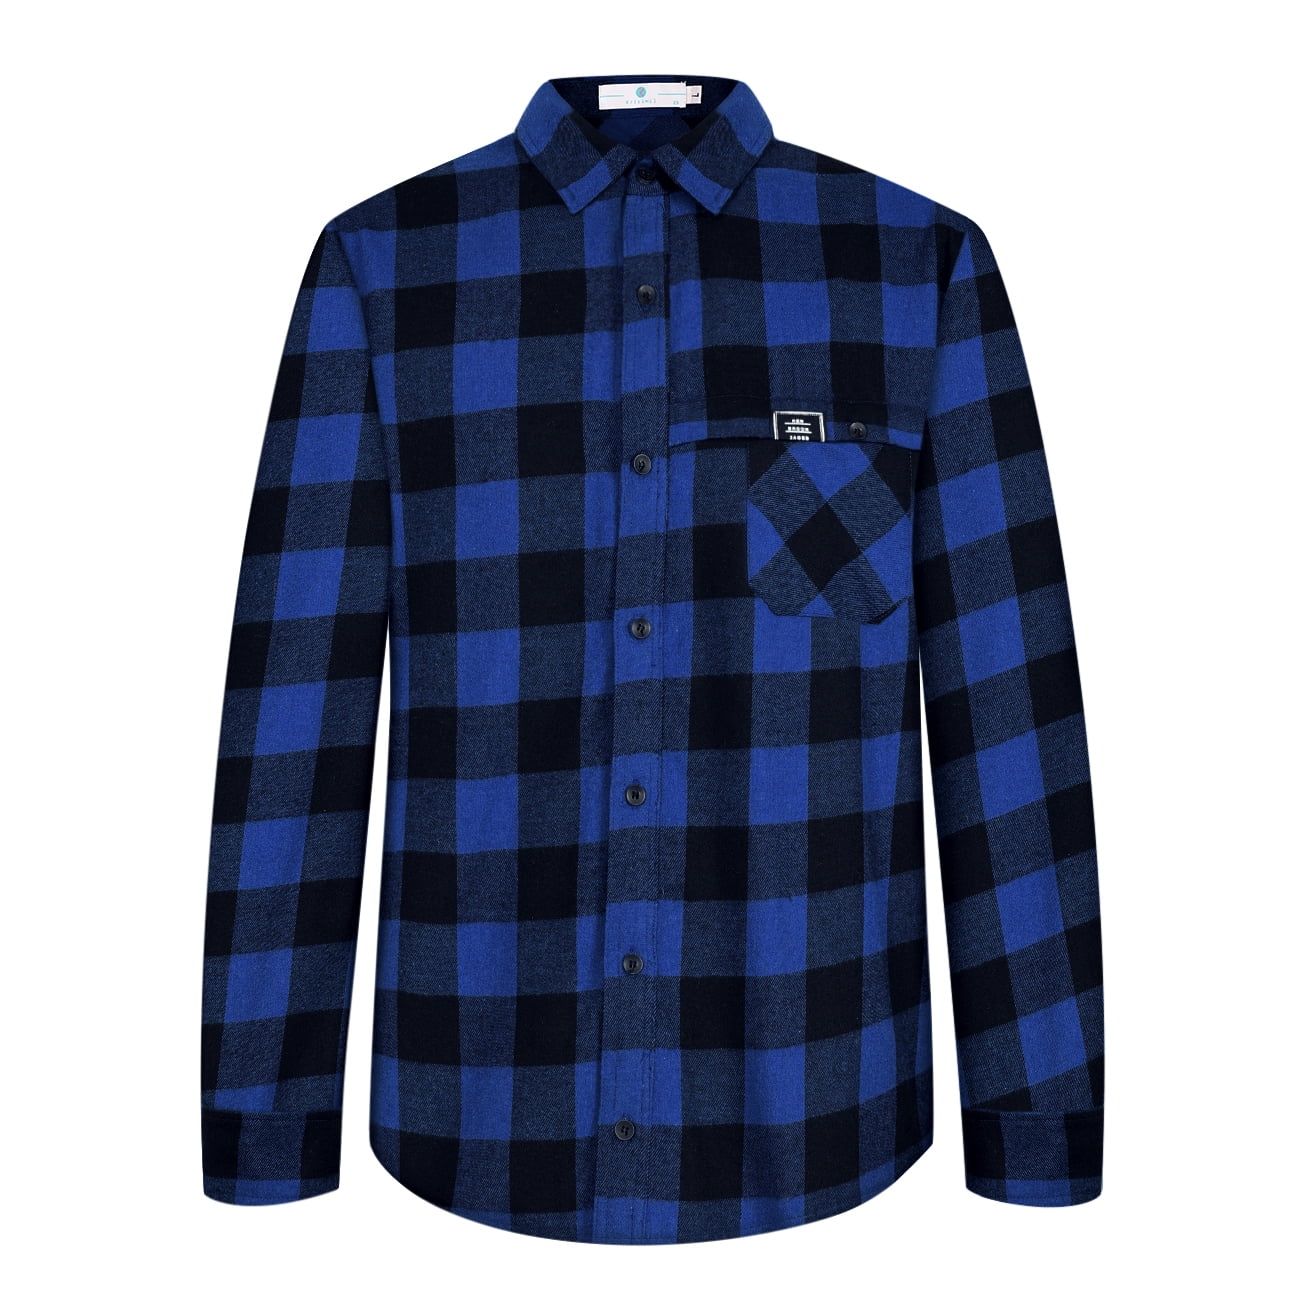 Flannel Shirt for Men Casual Button-Down Shirts Regular Fit Long Sleeve ...